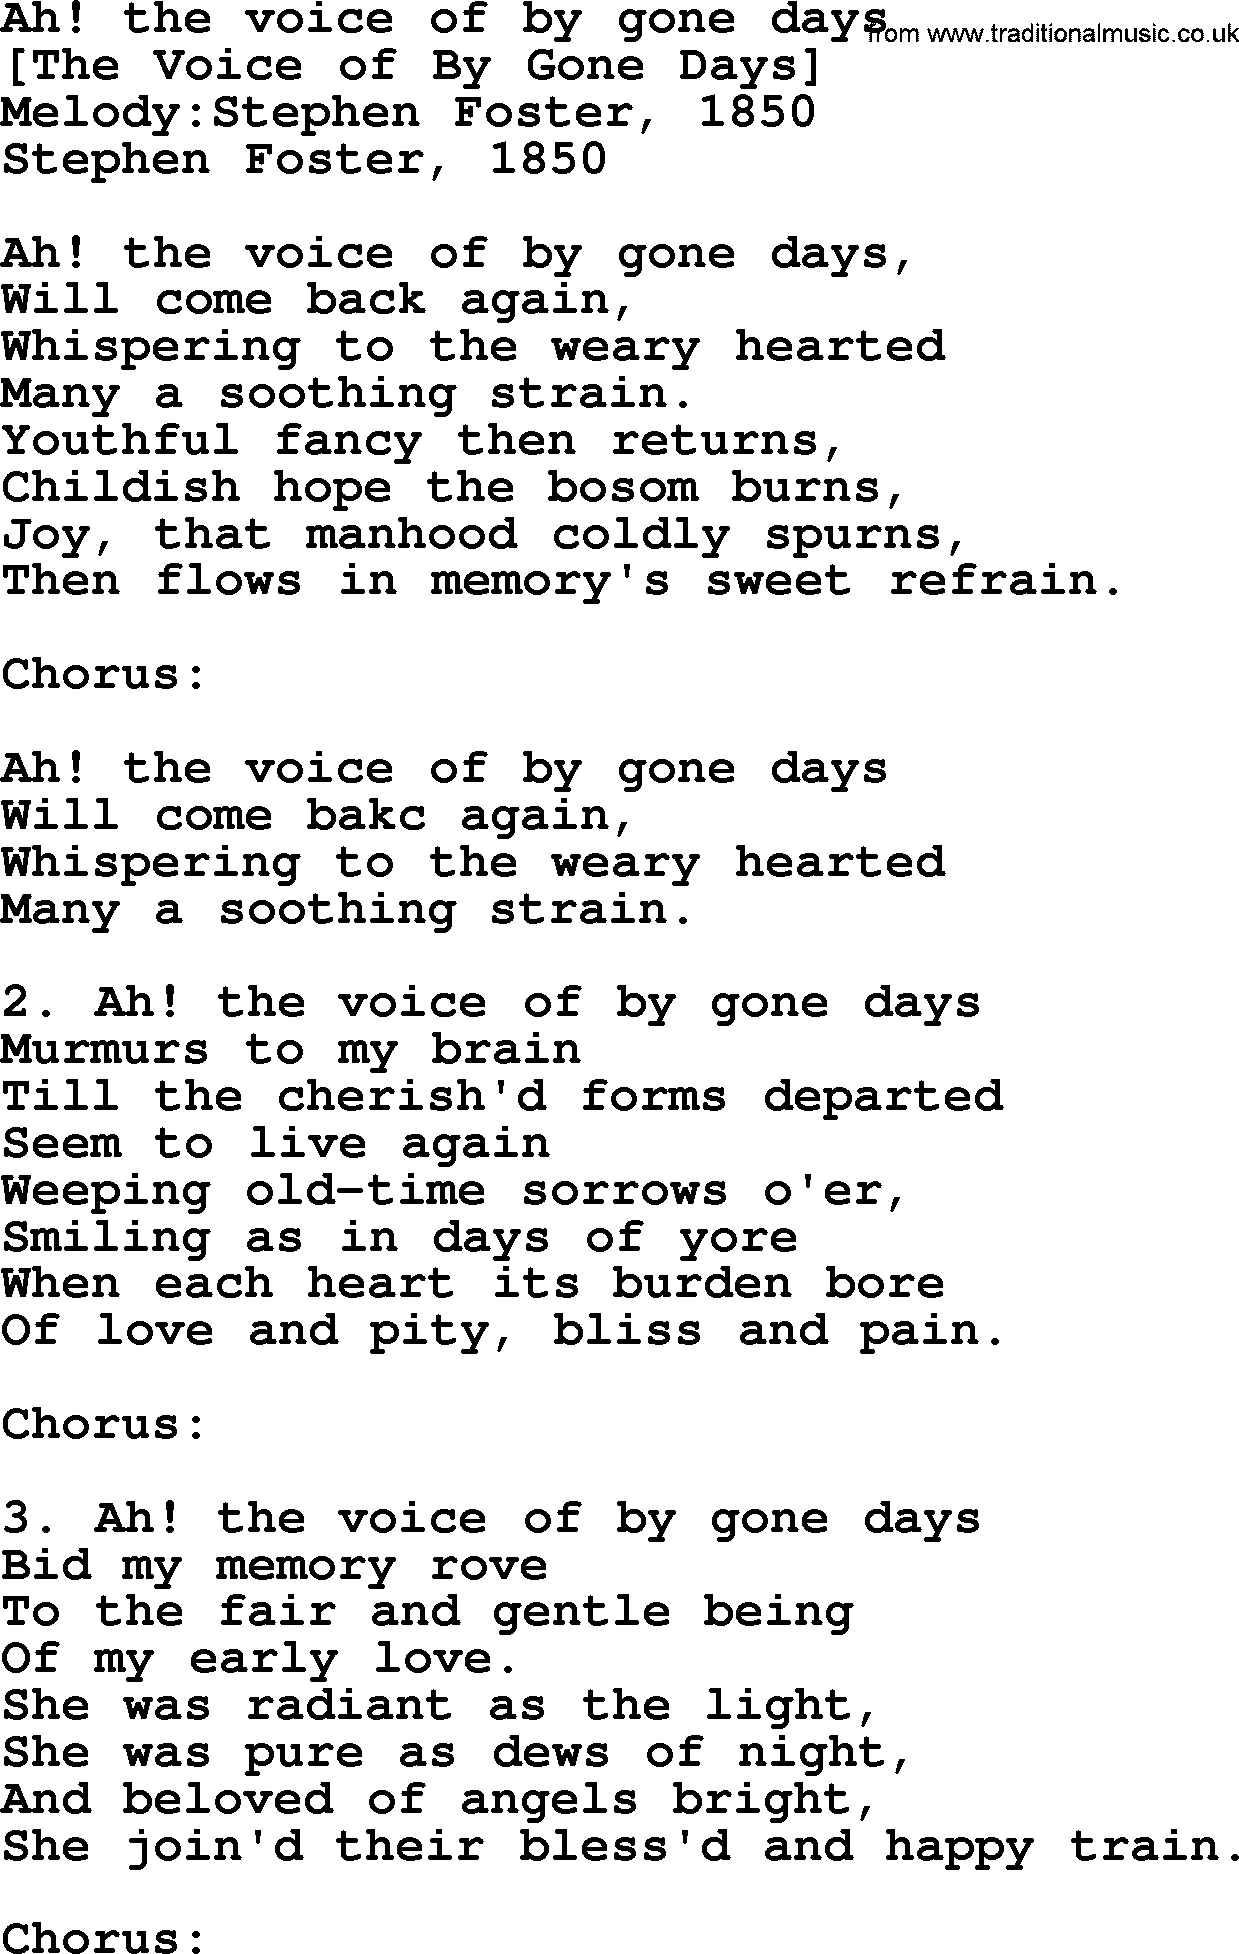 Old American Song: Ah! The Voice Of By Gone Days, lyrics